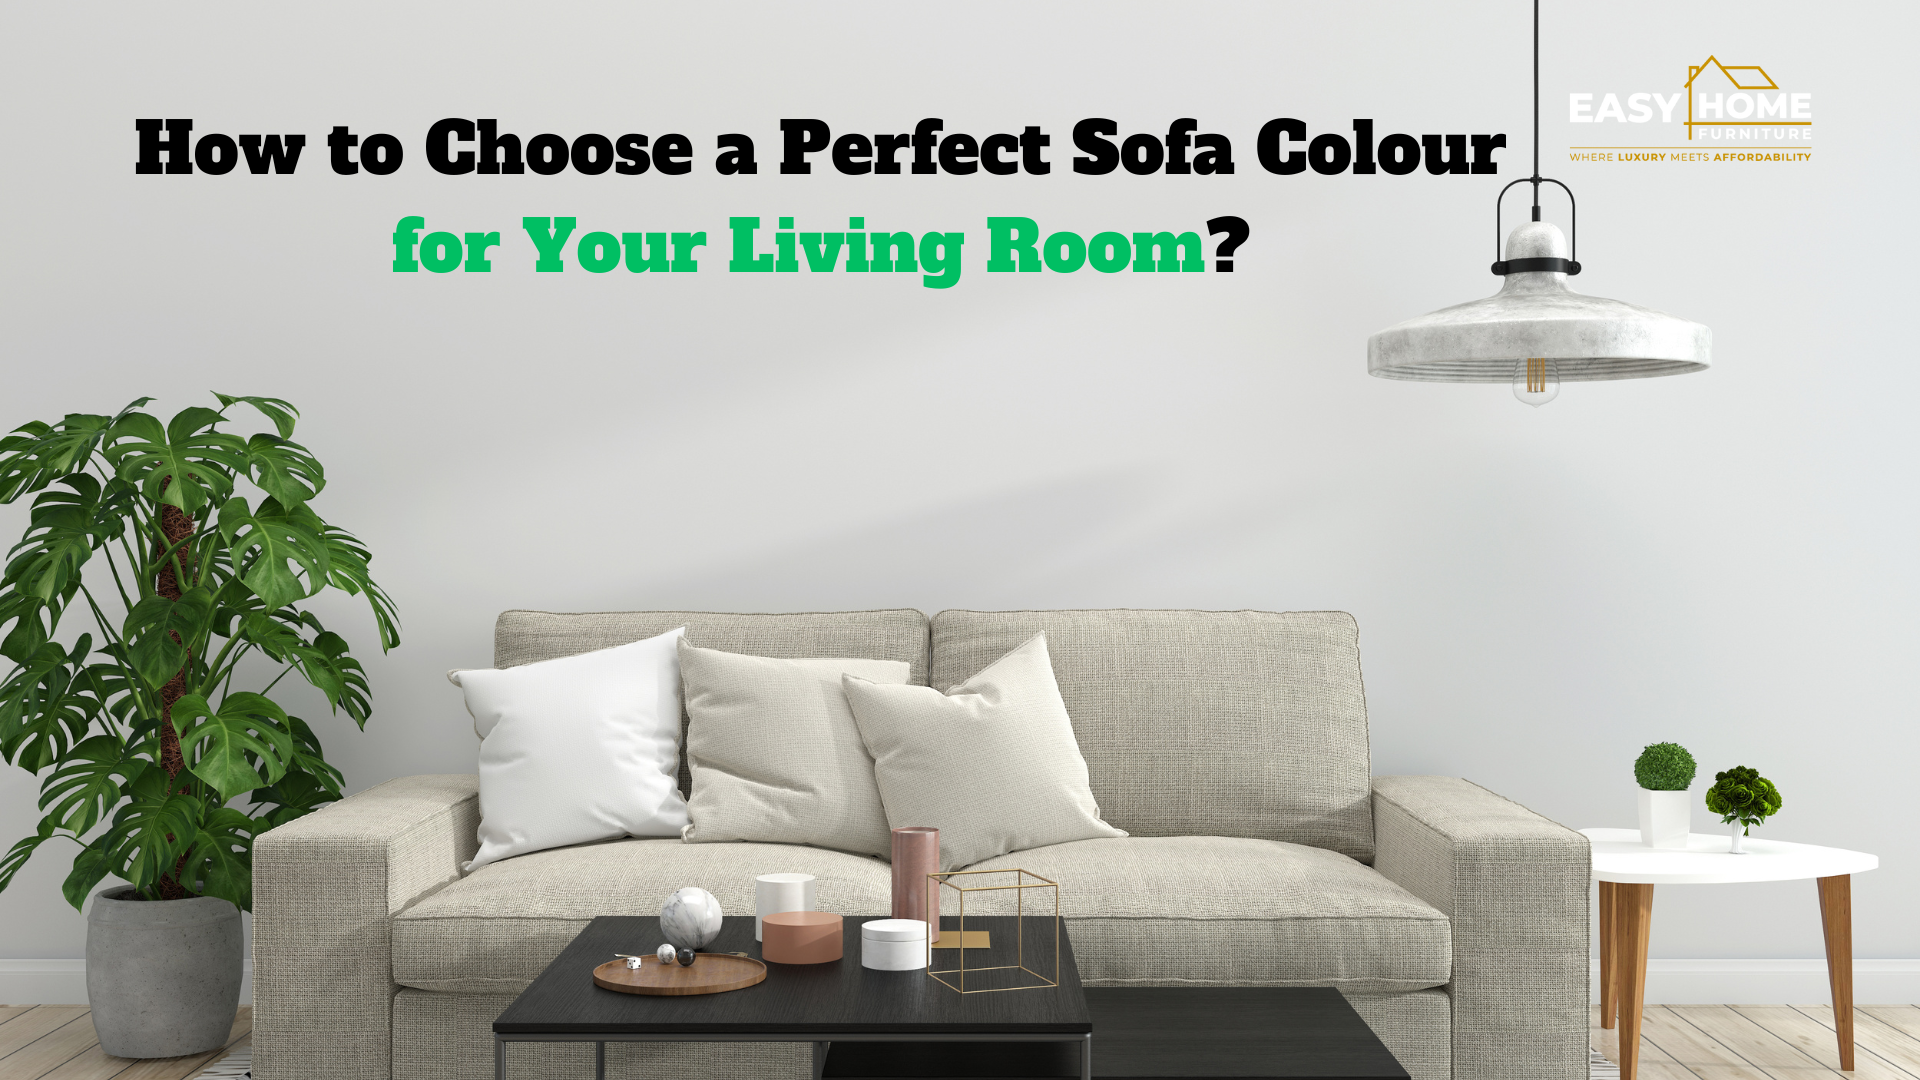 How to Choose a Perfect Sofa Colour for Your Living Room